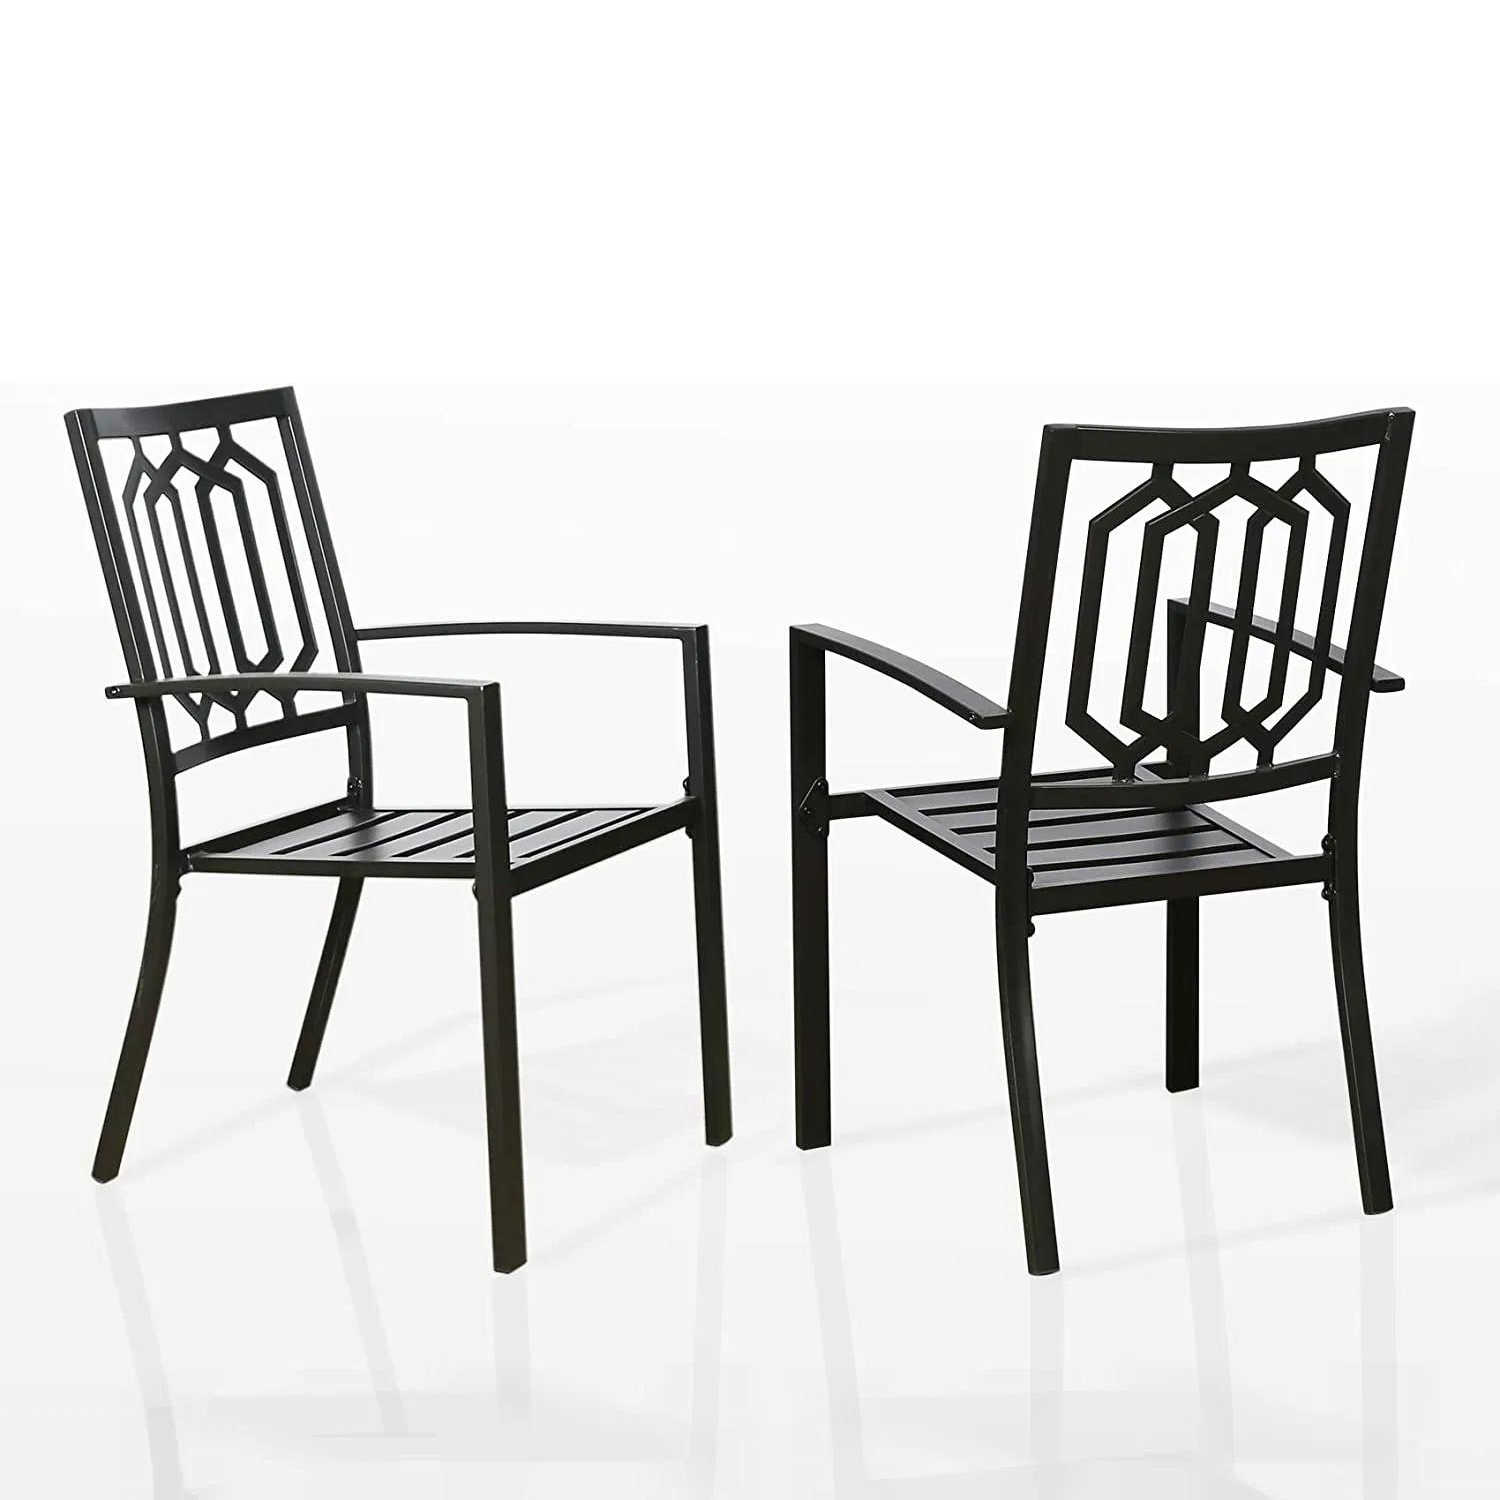 Set of 2 Stacking Patio Metal Arm Chairs for Outdoor Dining in Garden, Yard and Lawn